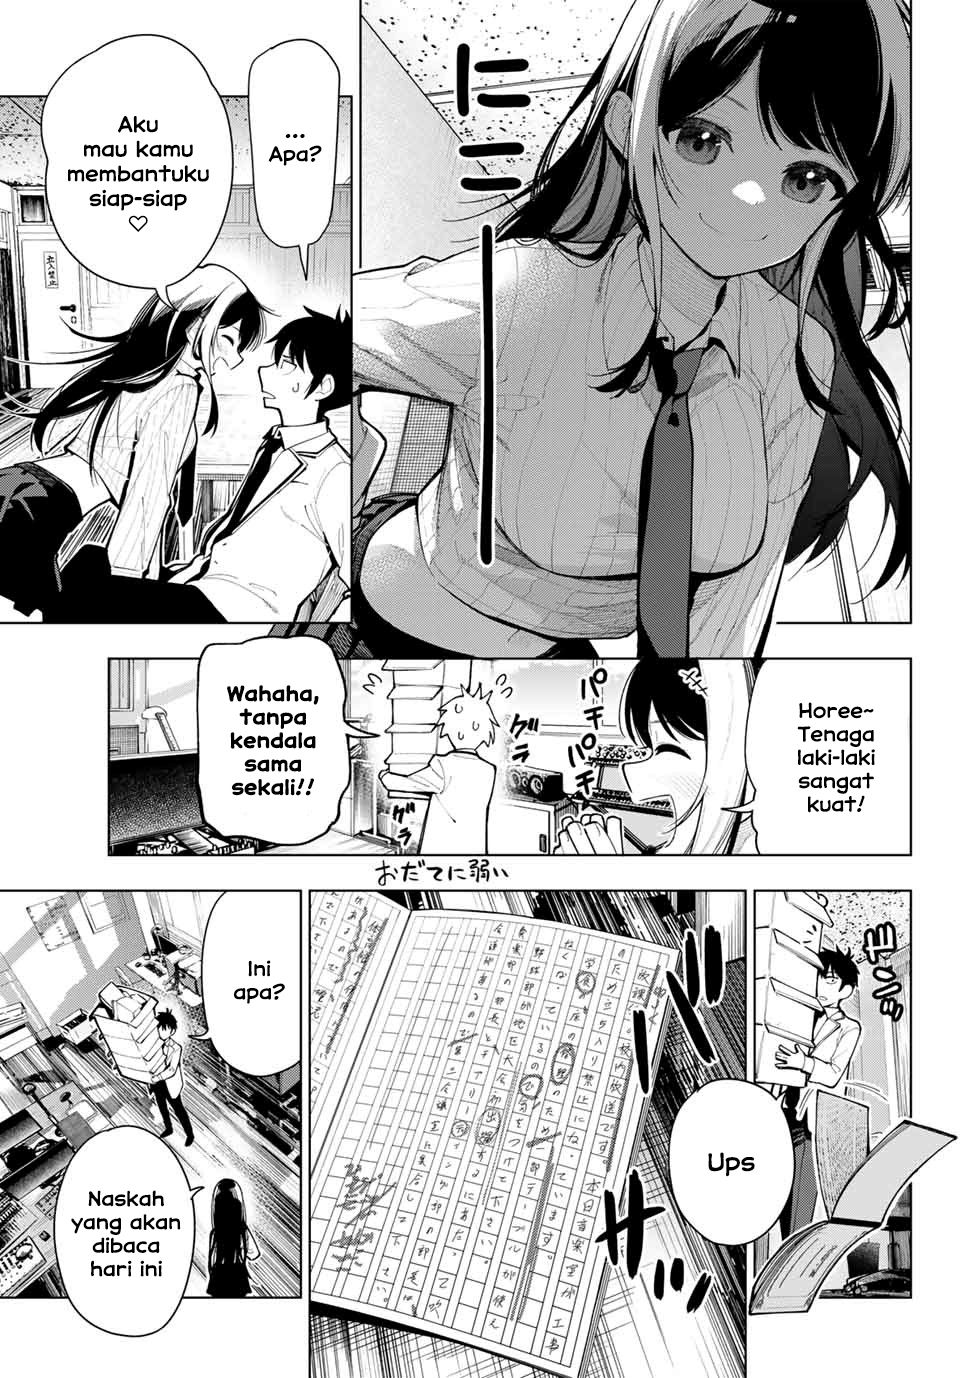 Mayonaka Heart Tune (Tune In to the Midnight Heart) Chapter 02 Image 10